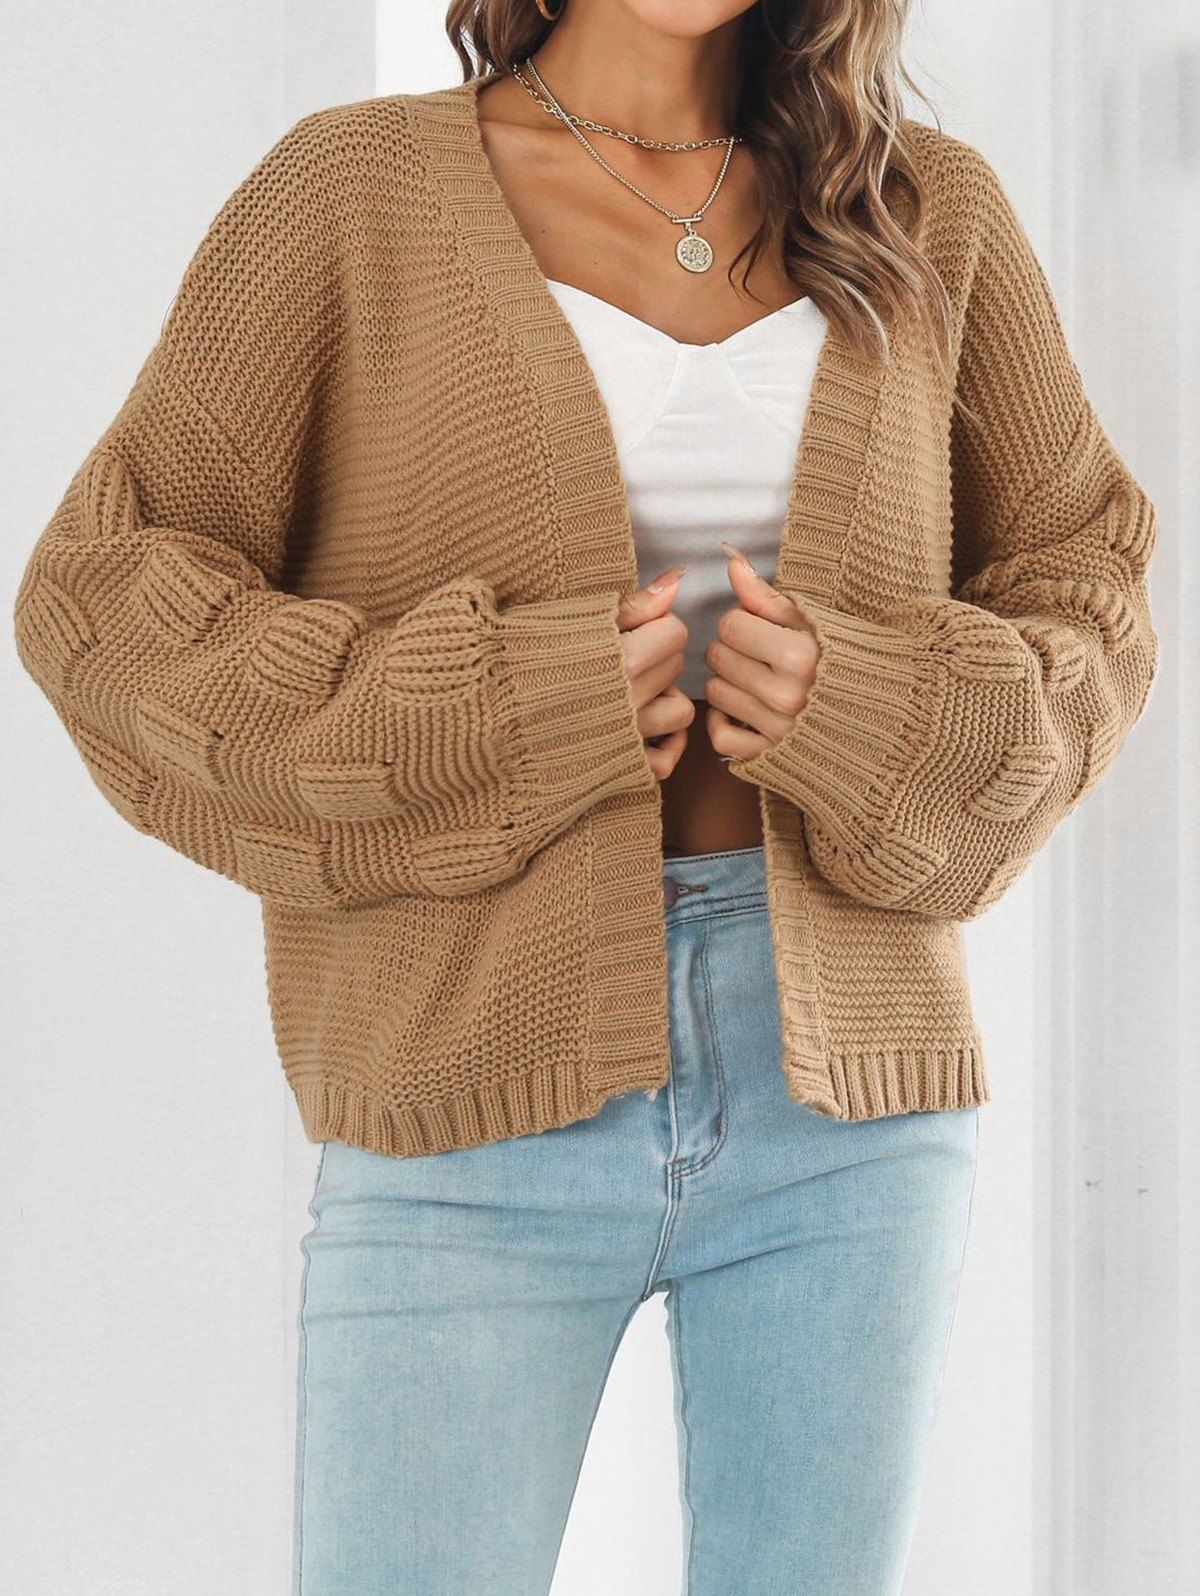 Textured Sweater Cardigan Plain Color Open Front Long Sleeve Sweater Cardigan - DEEP YELLOW L